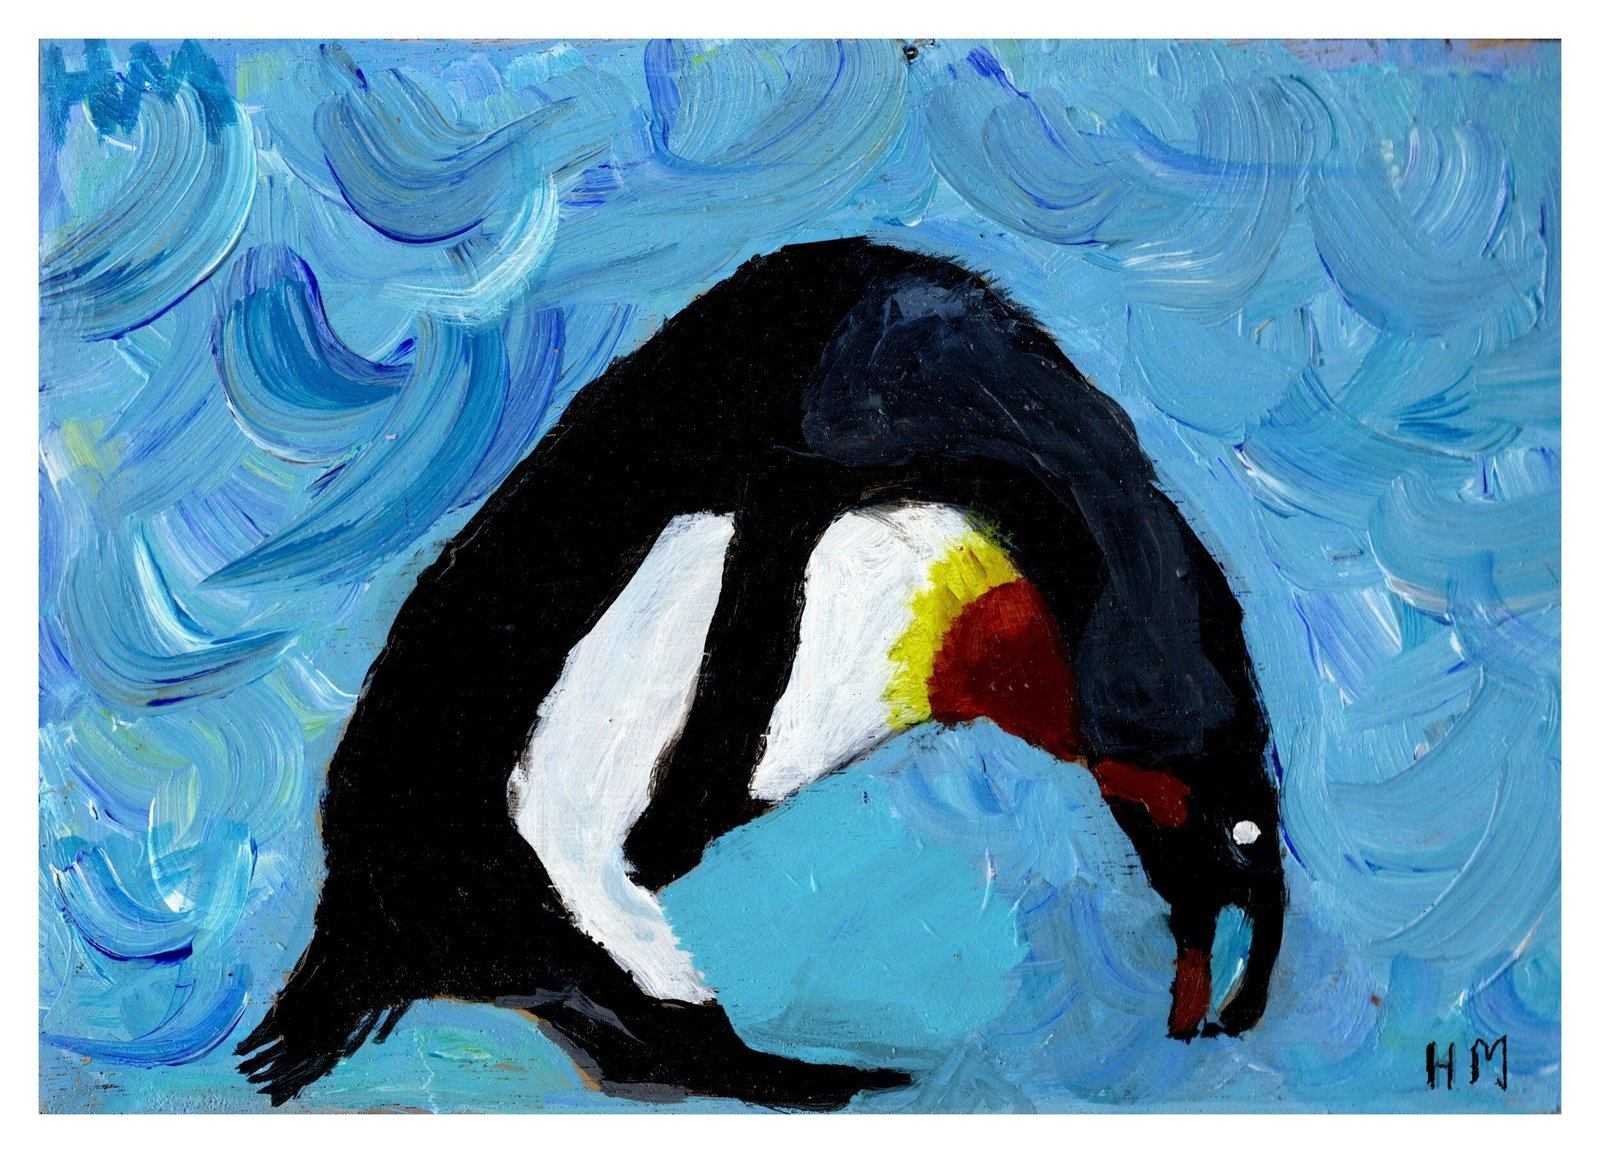 Penguin painting done by young artist Holly Mansfield Numbered limited edition Giclee on Archival Matte paper ArtbyMyleslaurence